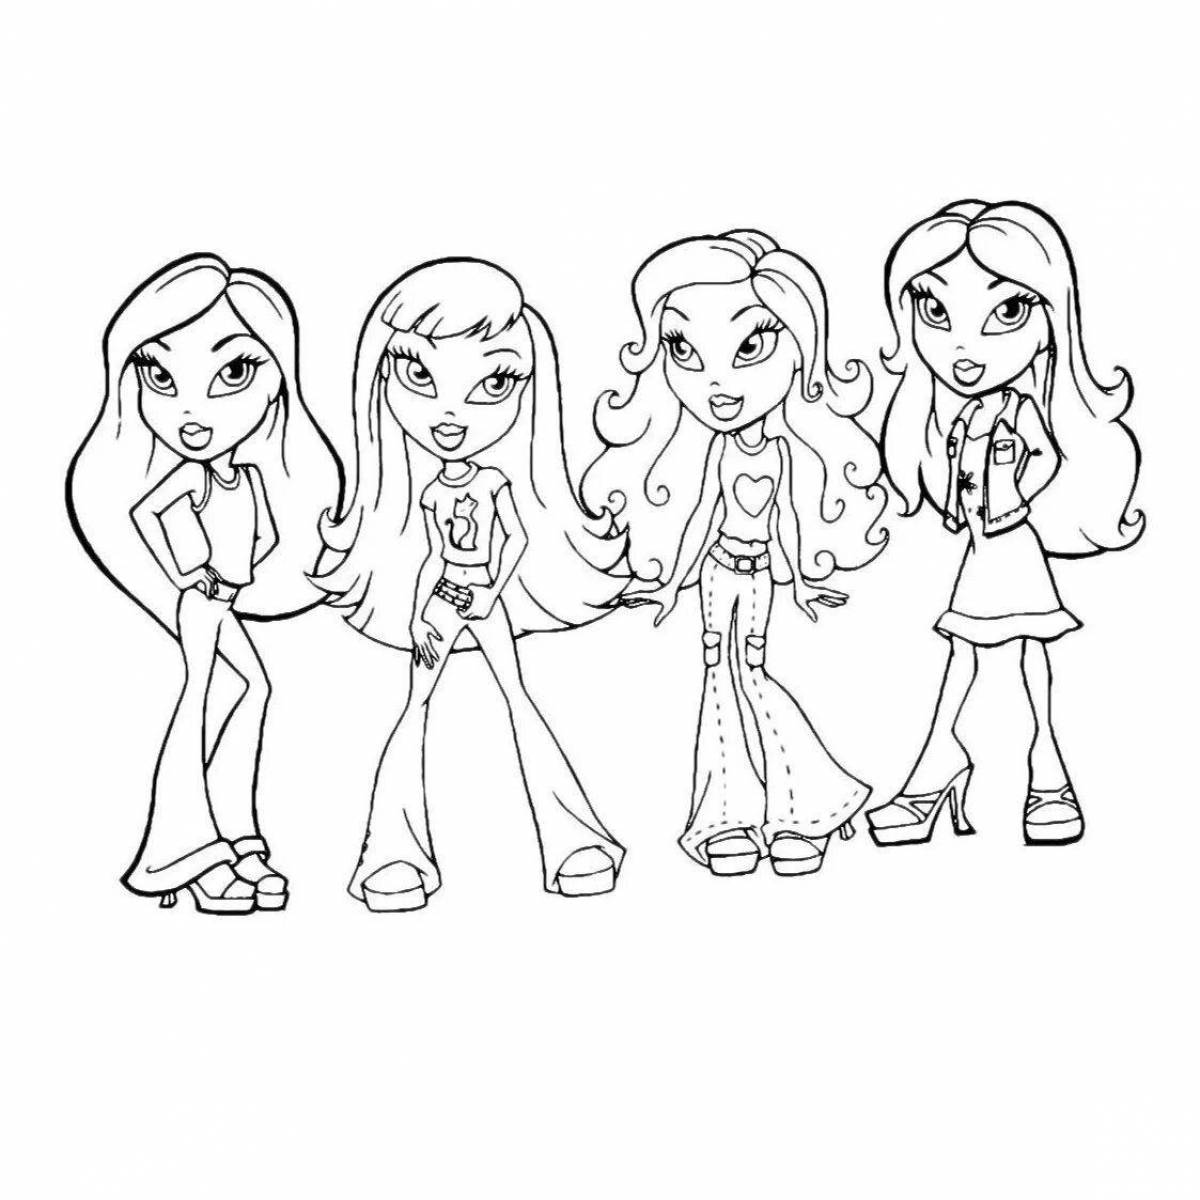 Humorous coloring page enable